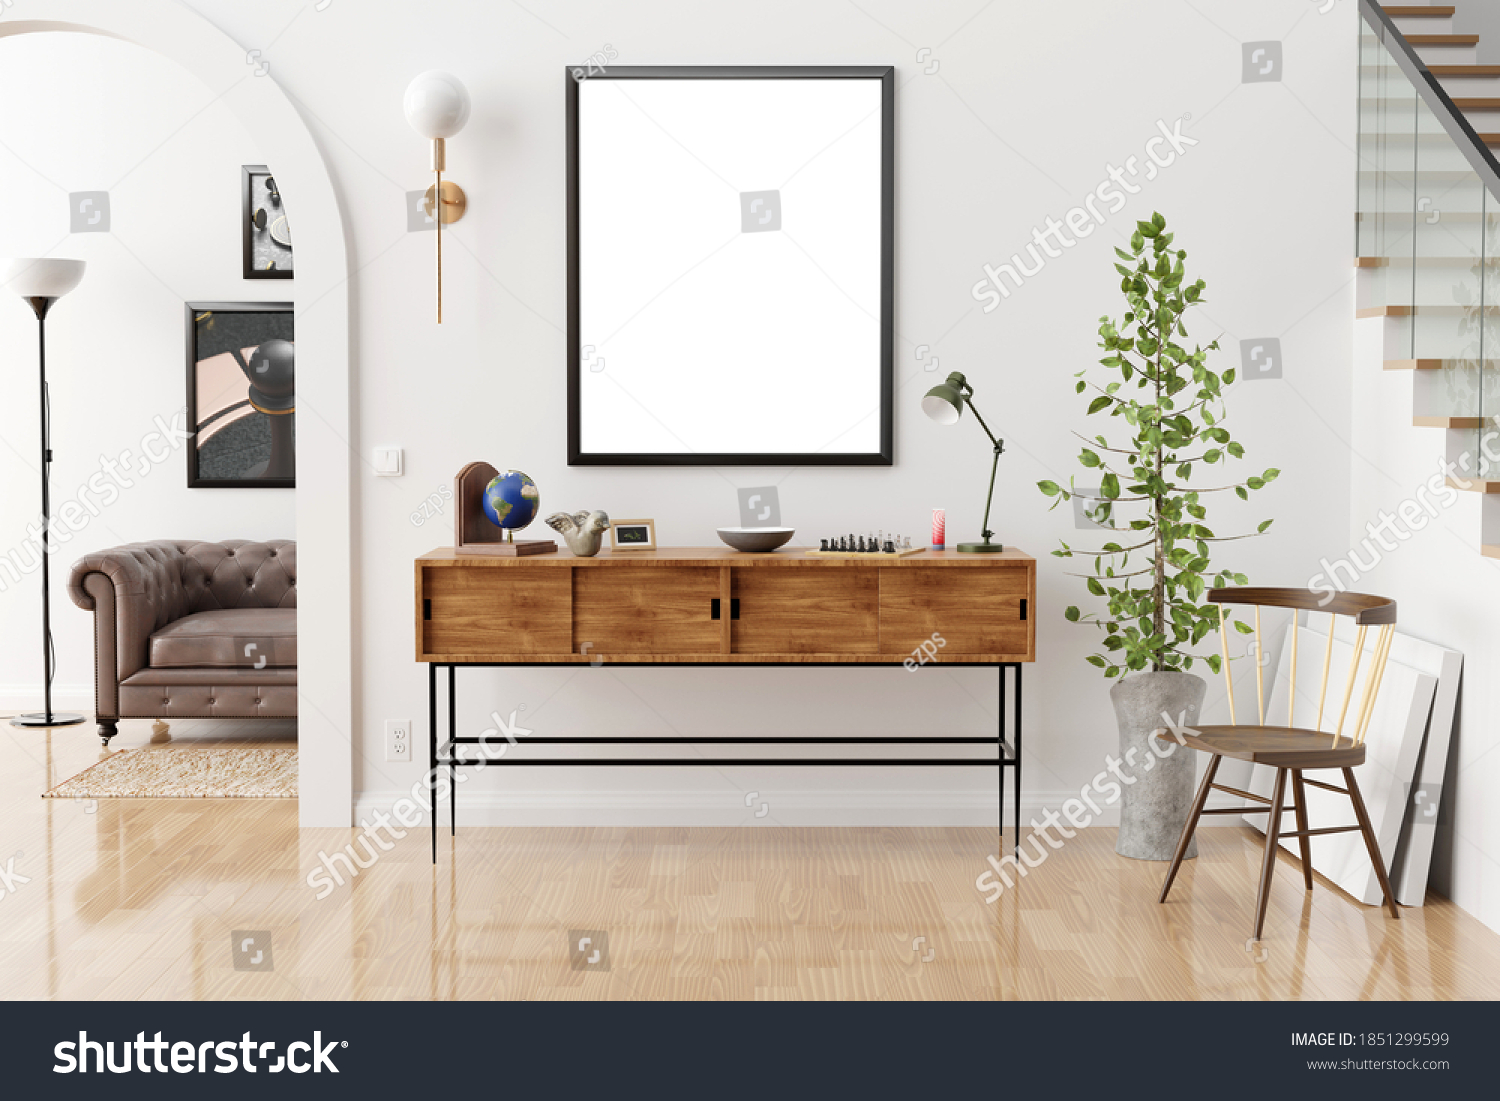 Stylish and eclectic dining room interior with mock up poster map, sharing table design chairs, gold pedant lamp and elegant sofa in second space. White walls, wooden parquet. Tropical leafs in vase. #1851299599